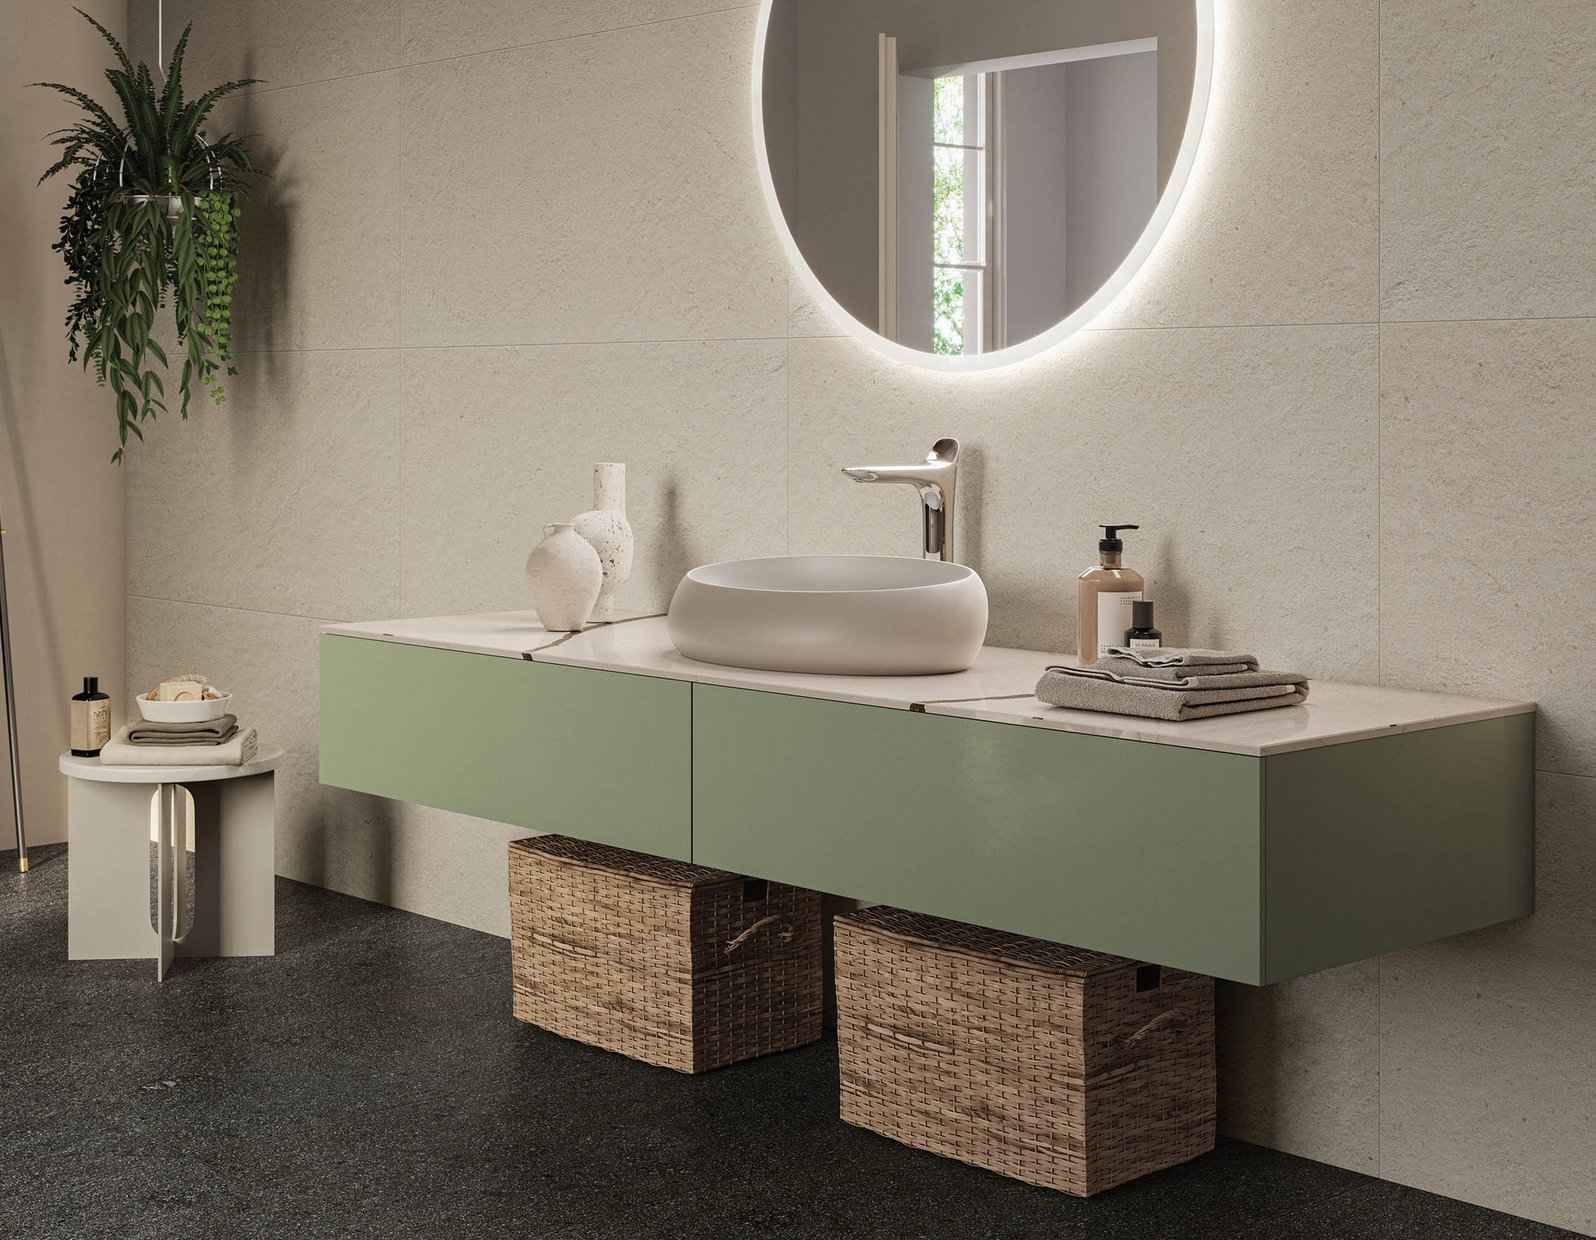 beige bath space with green cabinets, round mirror with LED lights, washbasin and wall tiles